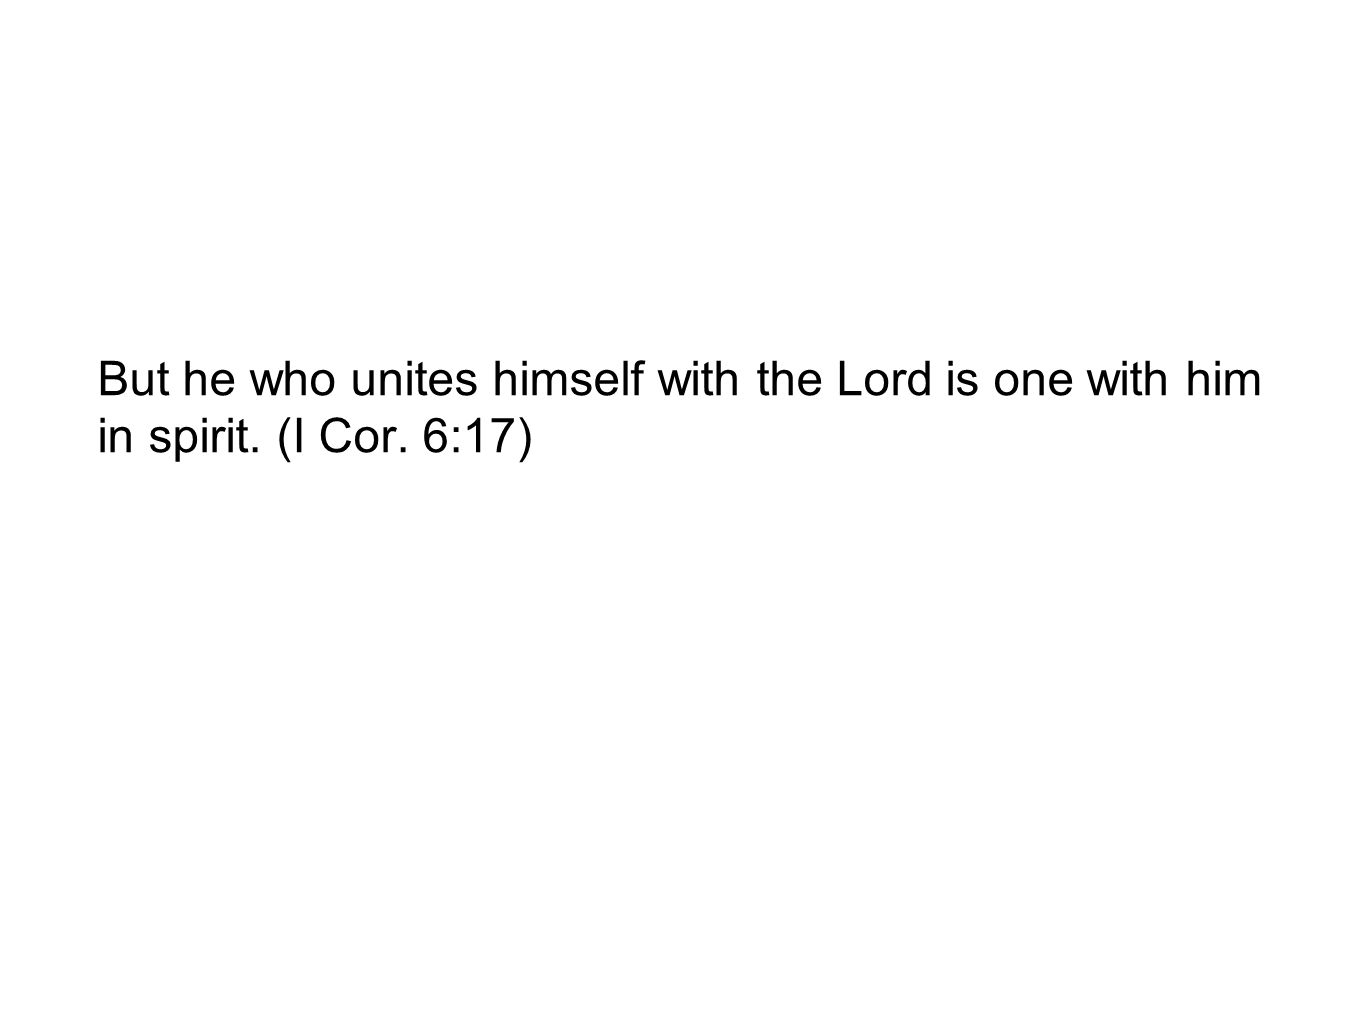 But he who unites himself with the Lord is one with him in spirit